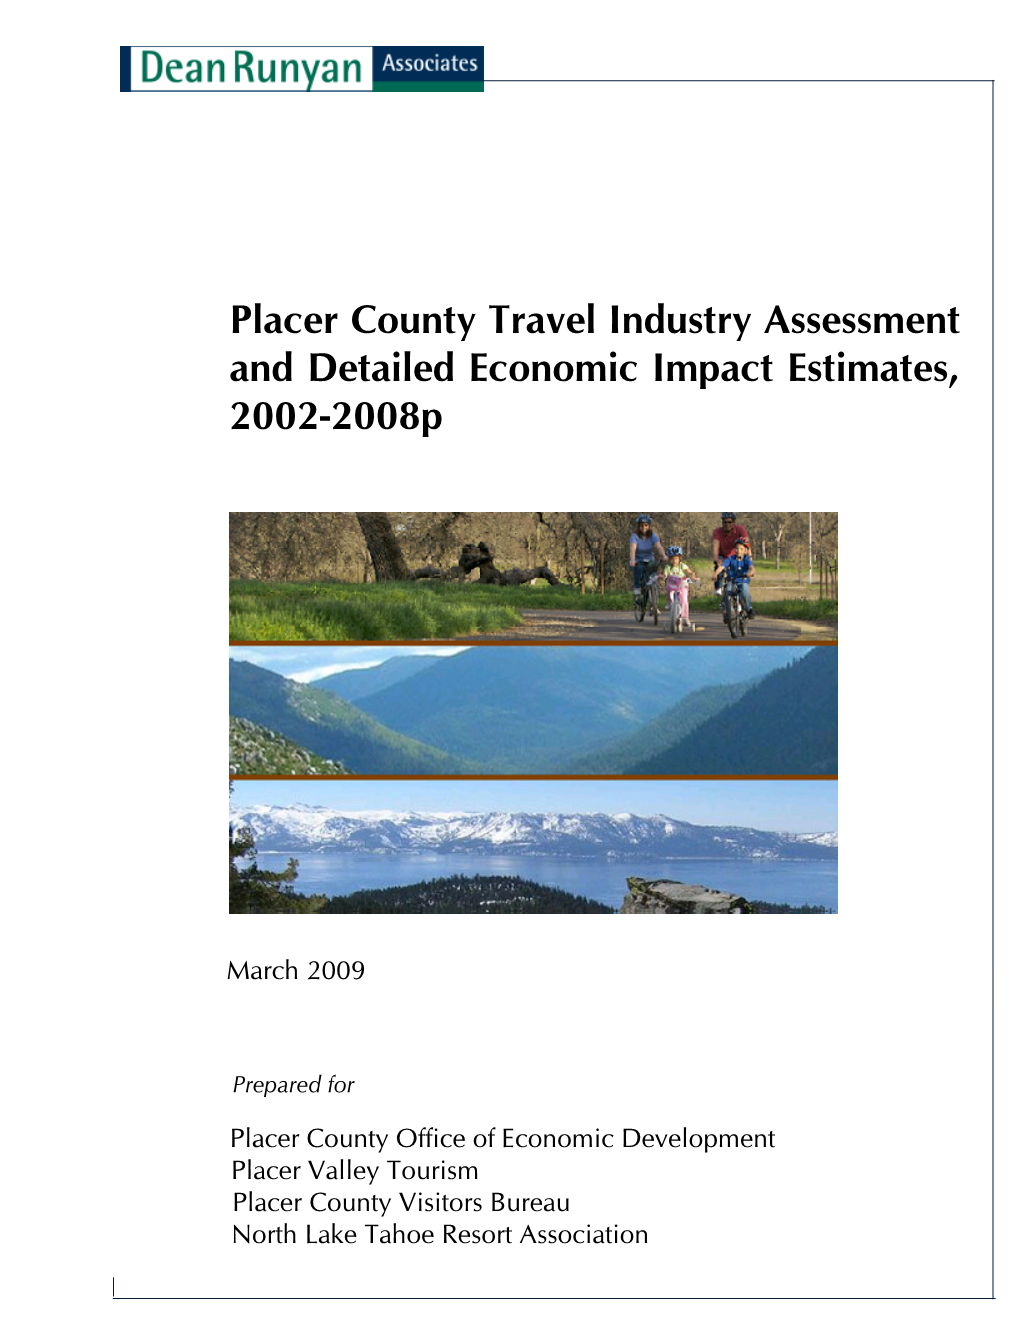 The Placer County Travel Industry Assessment